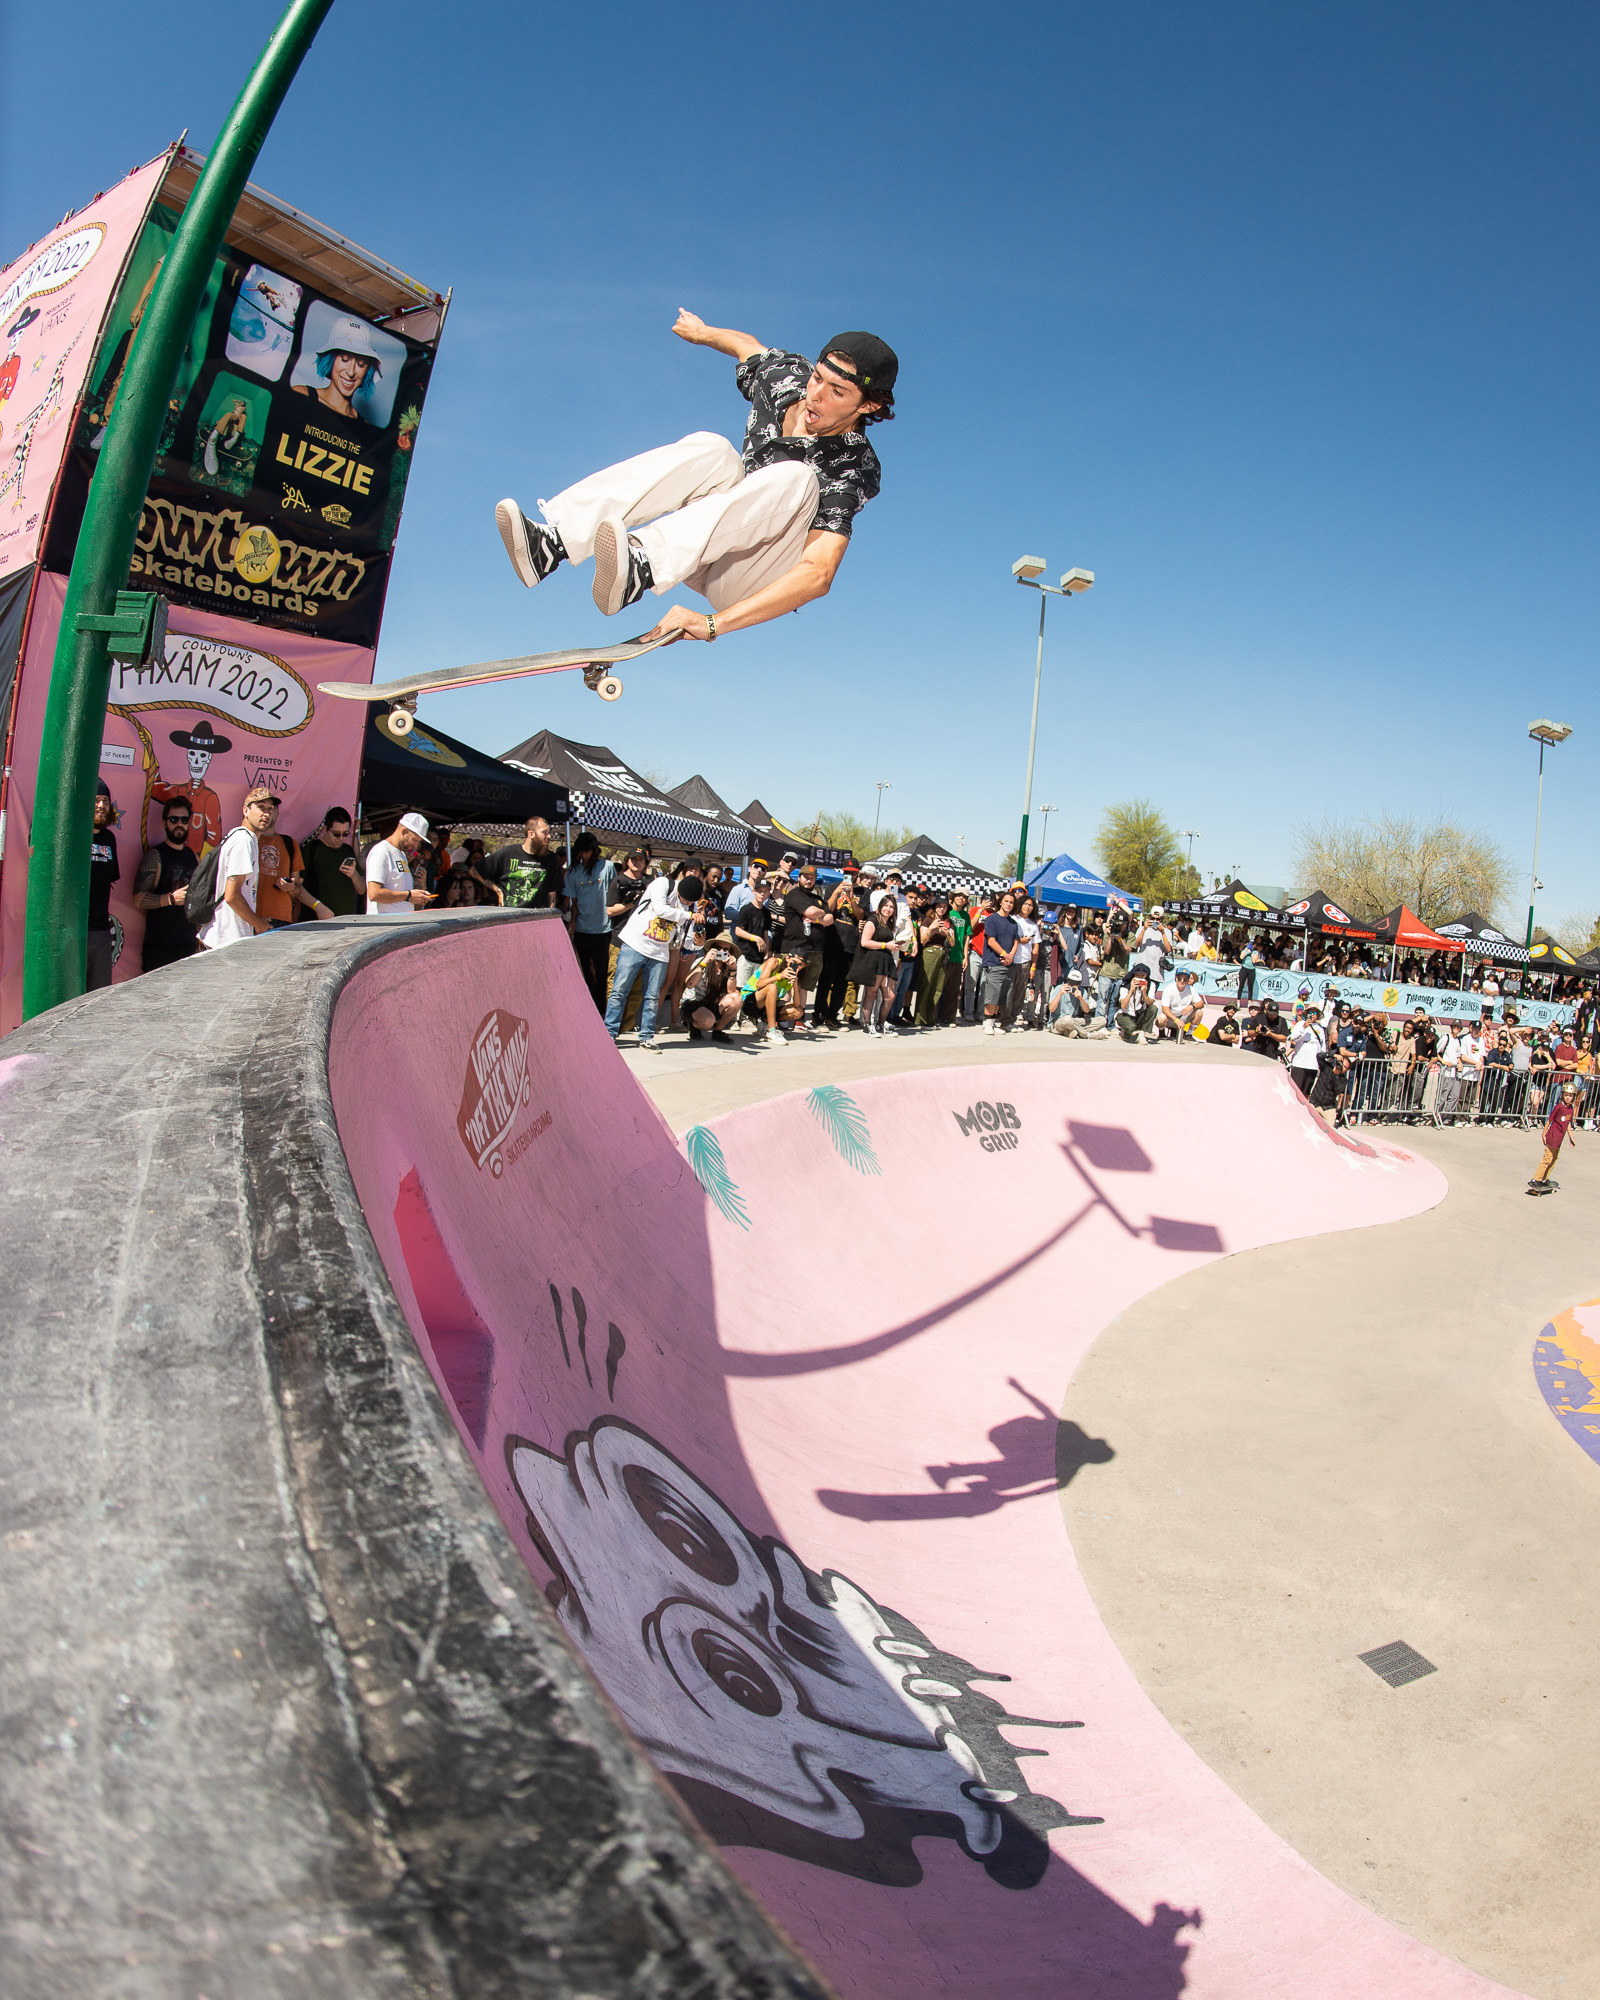 Monster Army's Jake Yanko Competed in PHXAM 2022 Street Skateboarding Contest